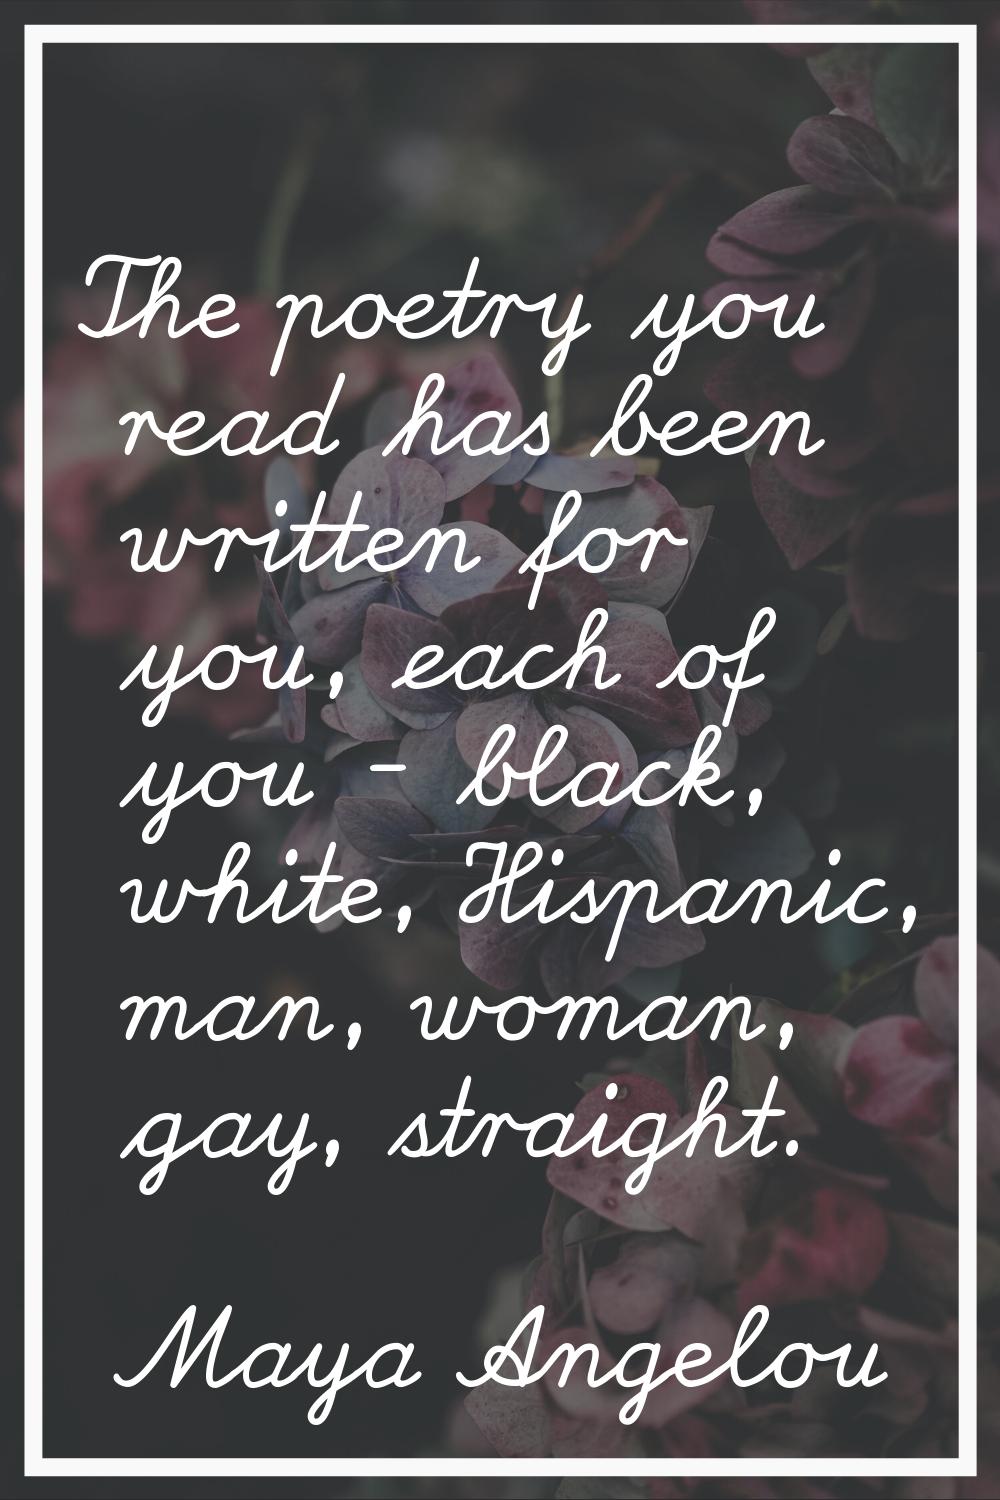 The poetry you read has been written for you, each of you - black, white, Hispanic, man, woman, gay